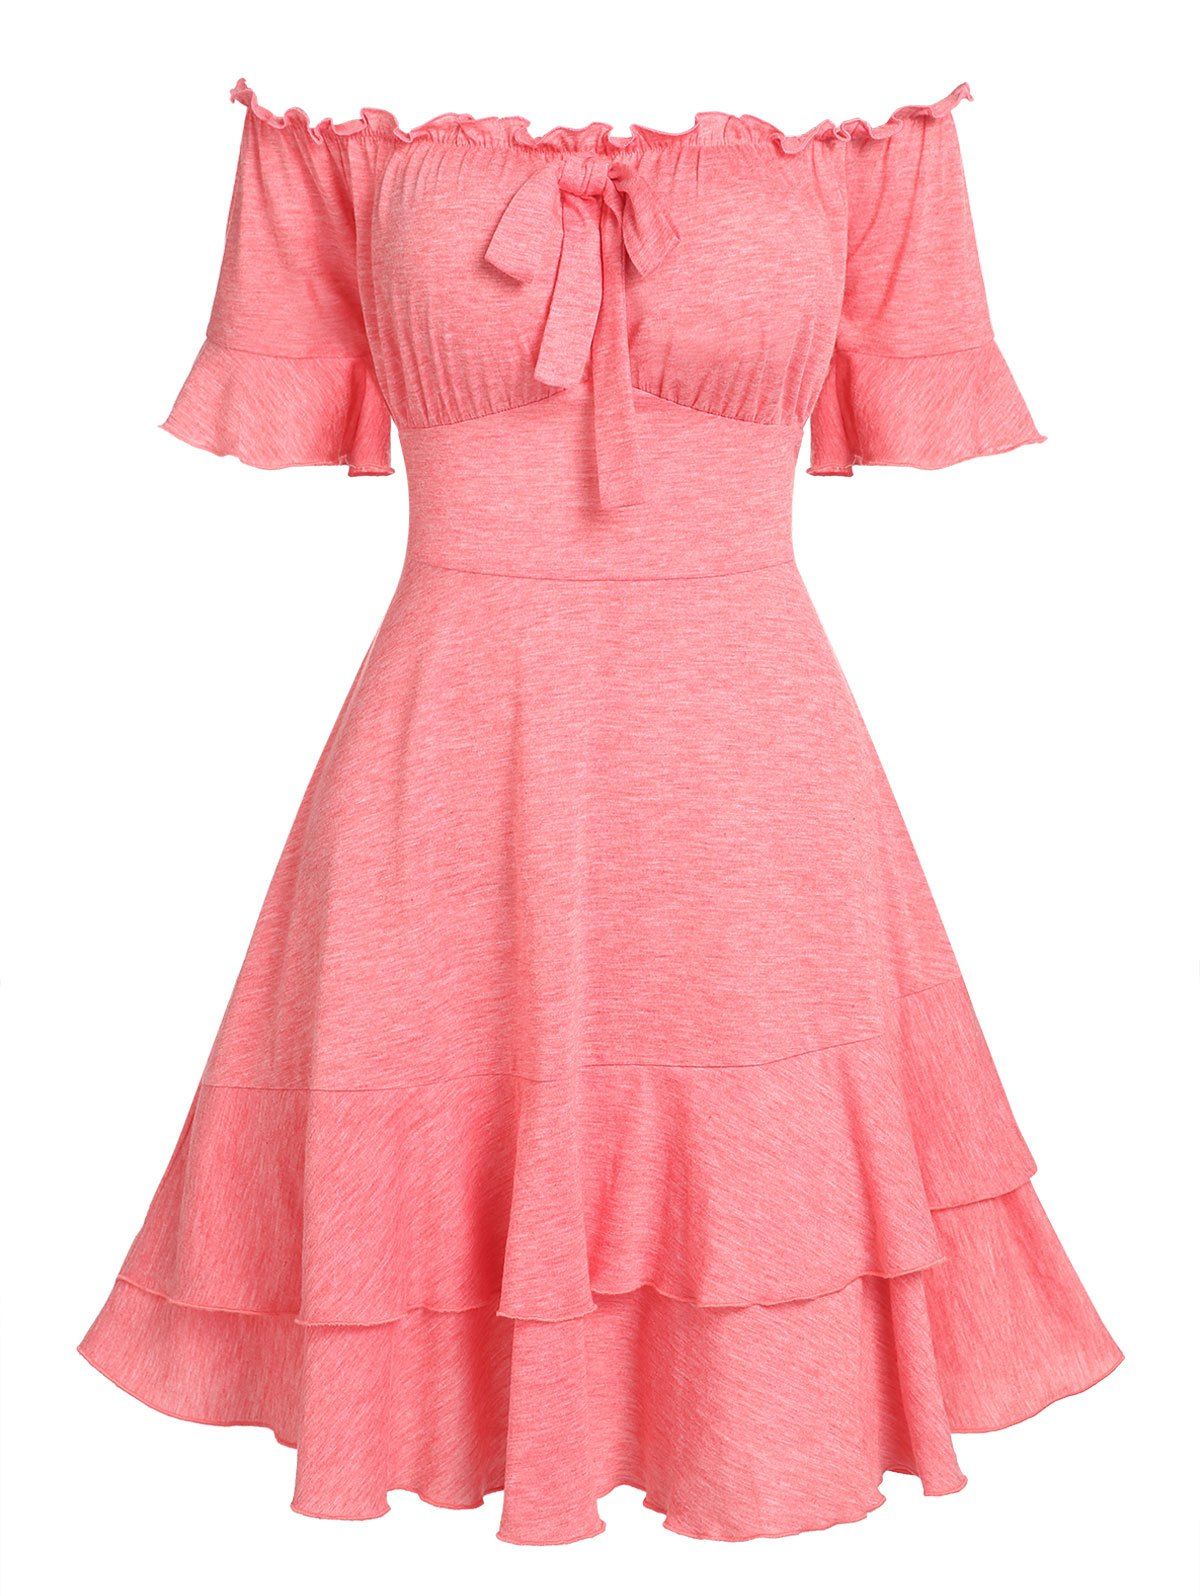 Bowknot Off The Shoulder Ruched Bust Flounced Dress - LIGHT PINK XXL